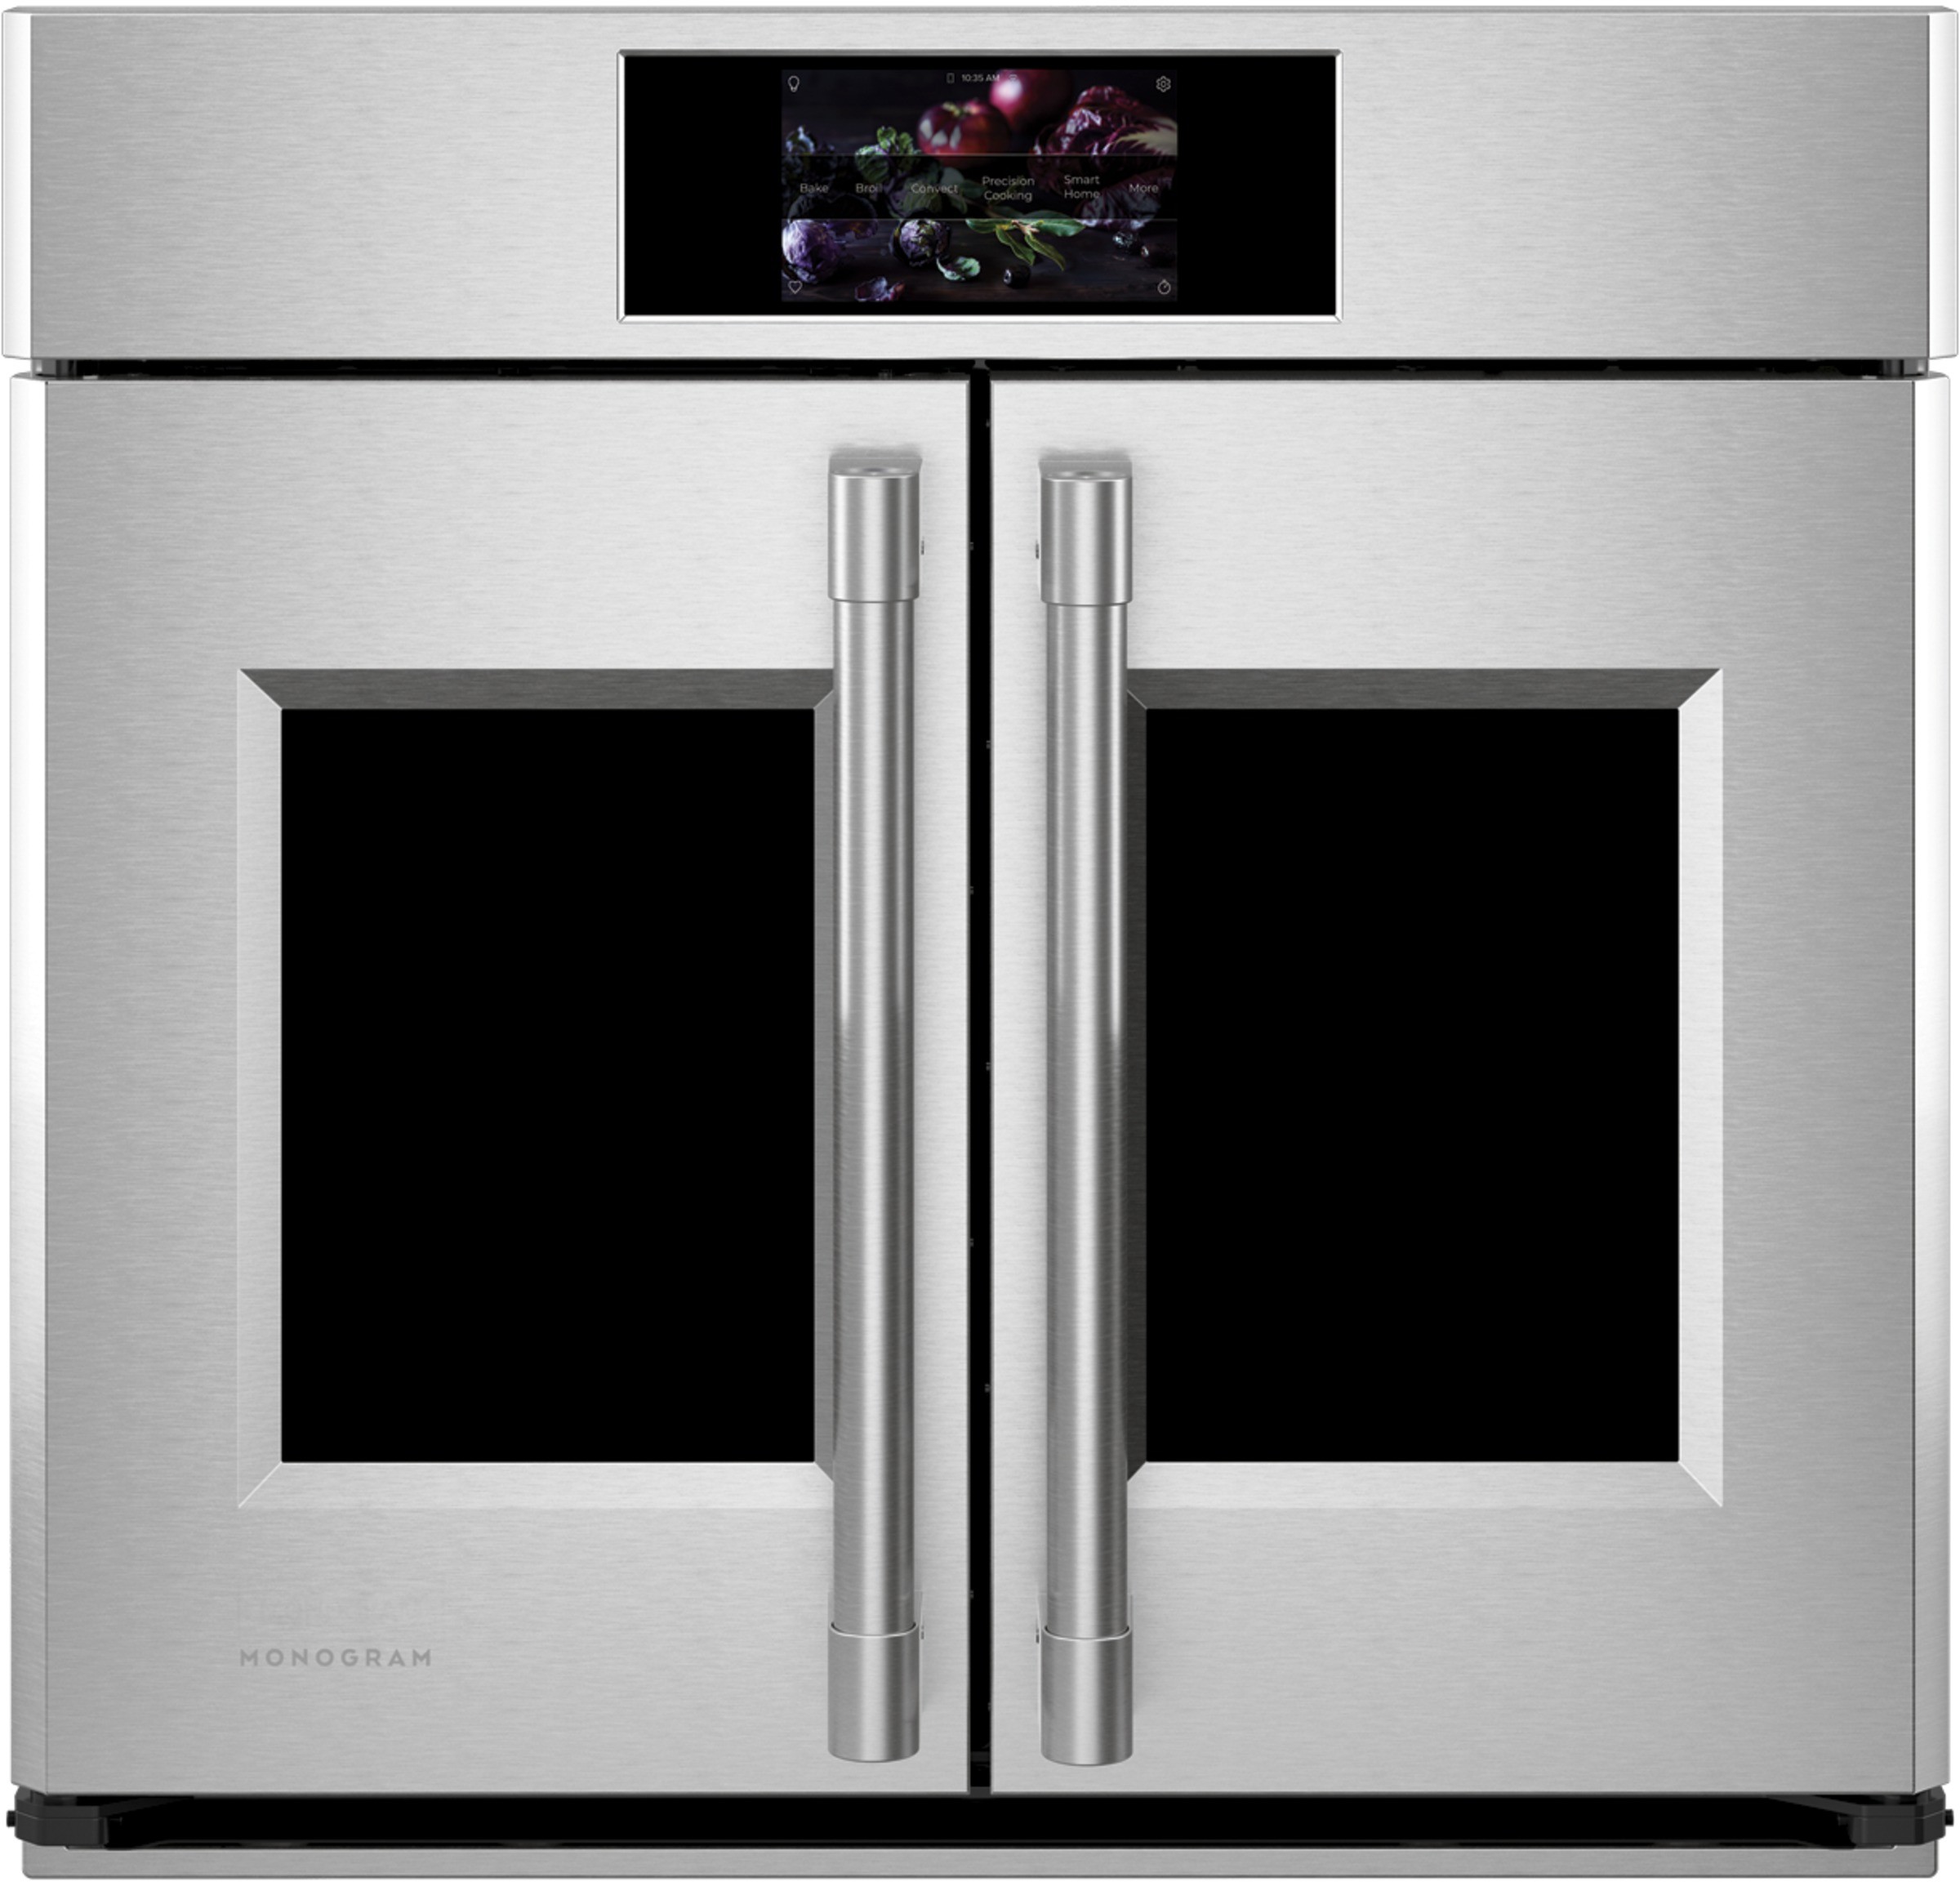 Monogram Statement 30 Single Electric Wall Oven ZTSX1FPSNSS